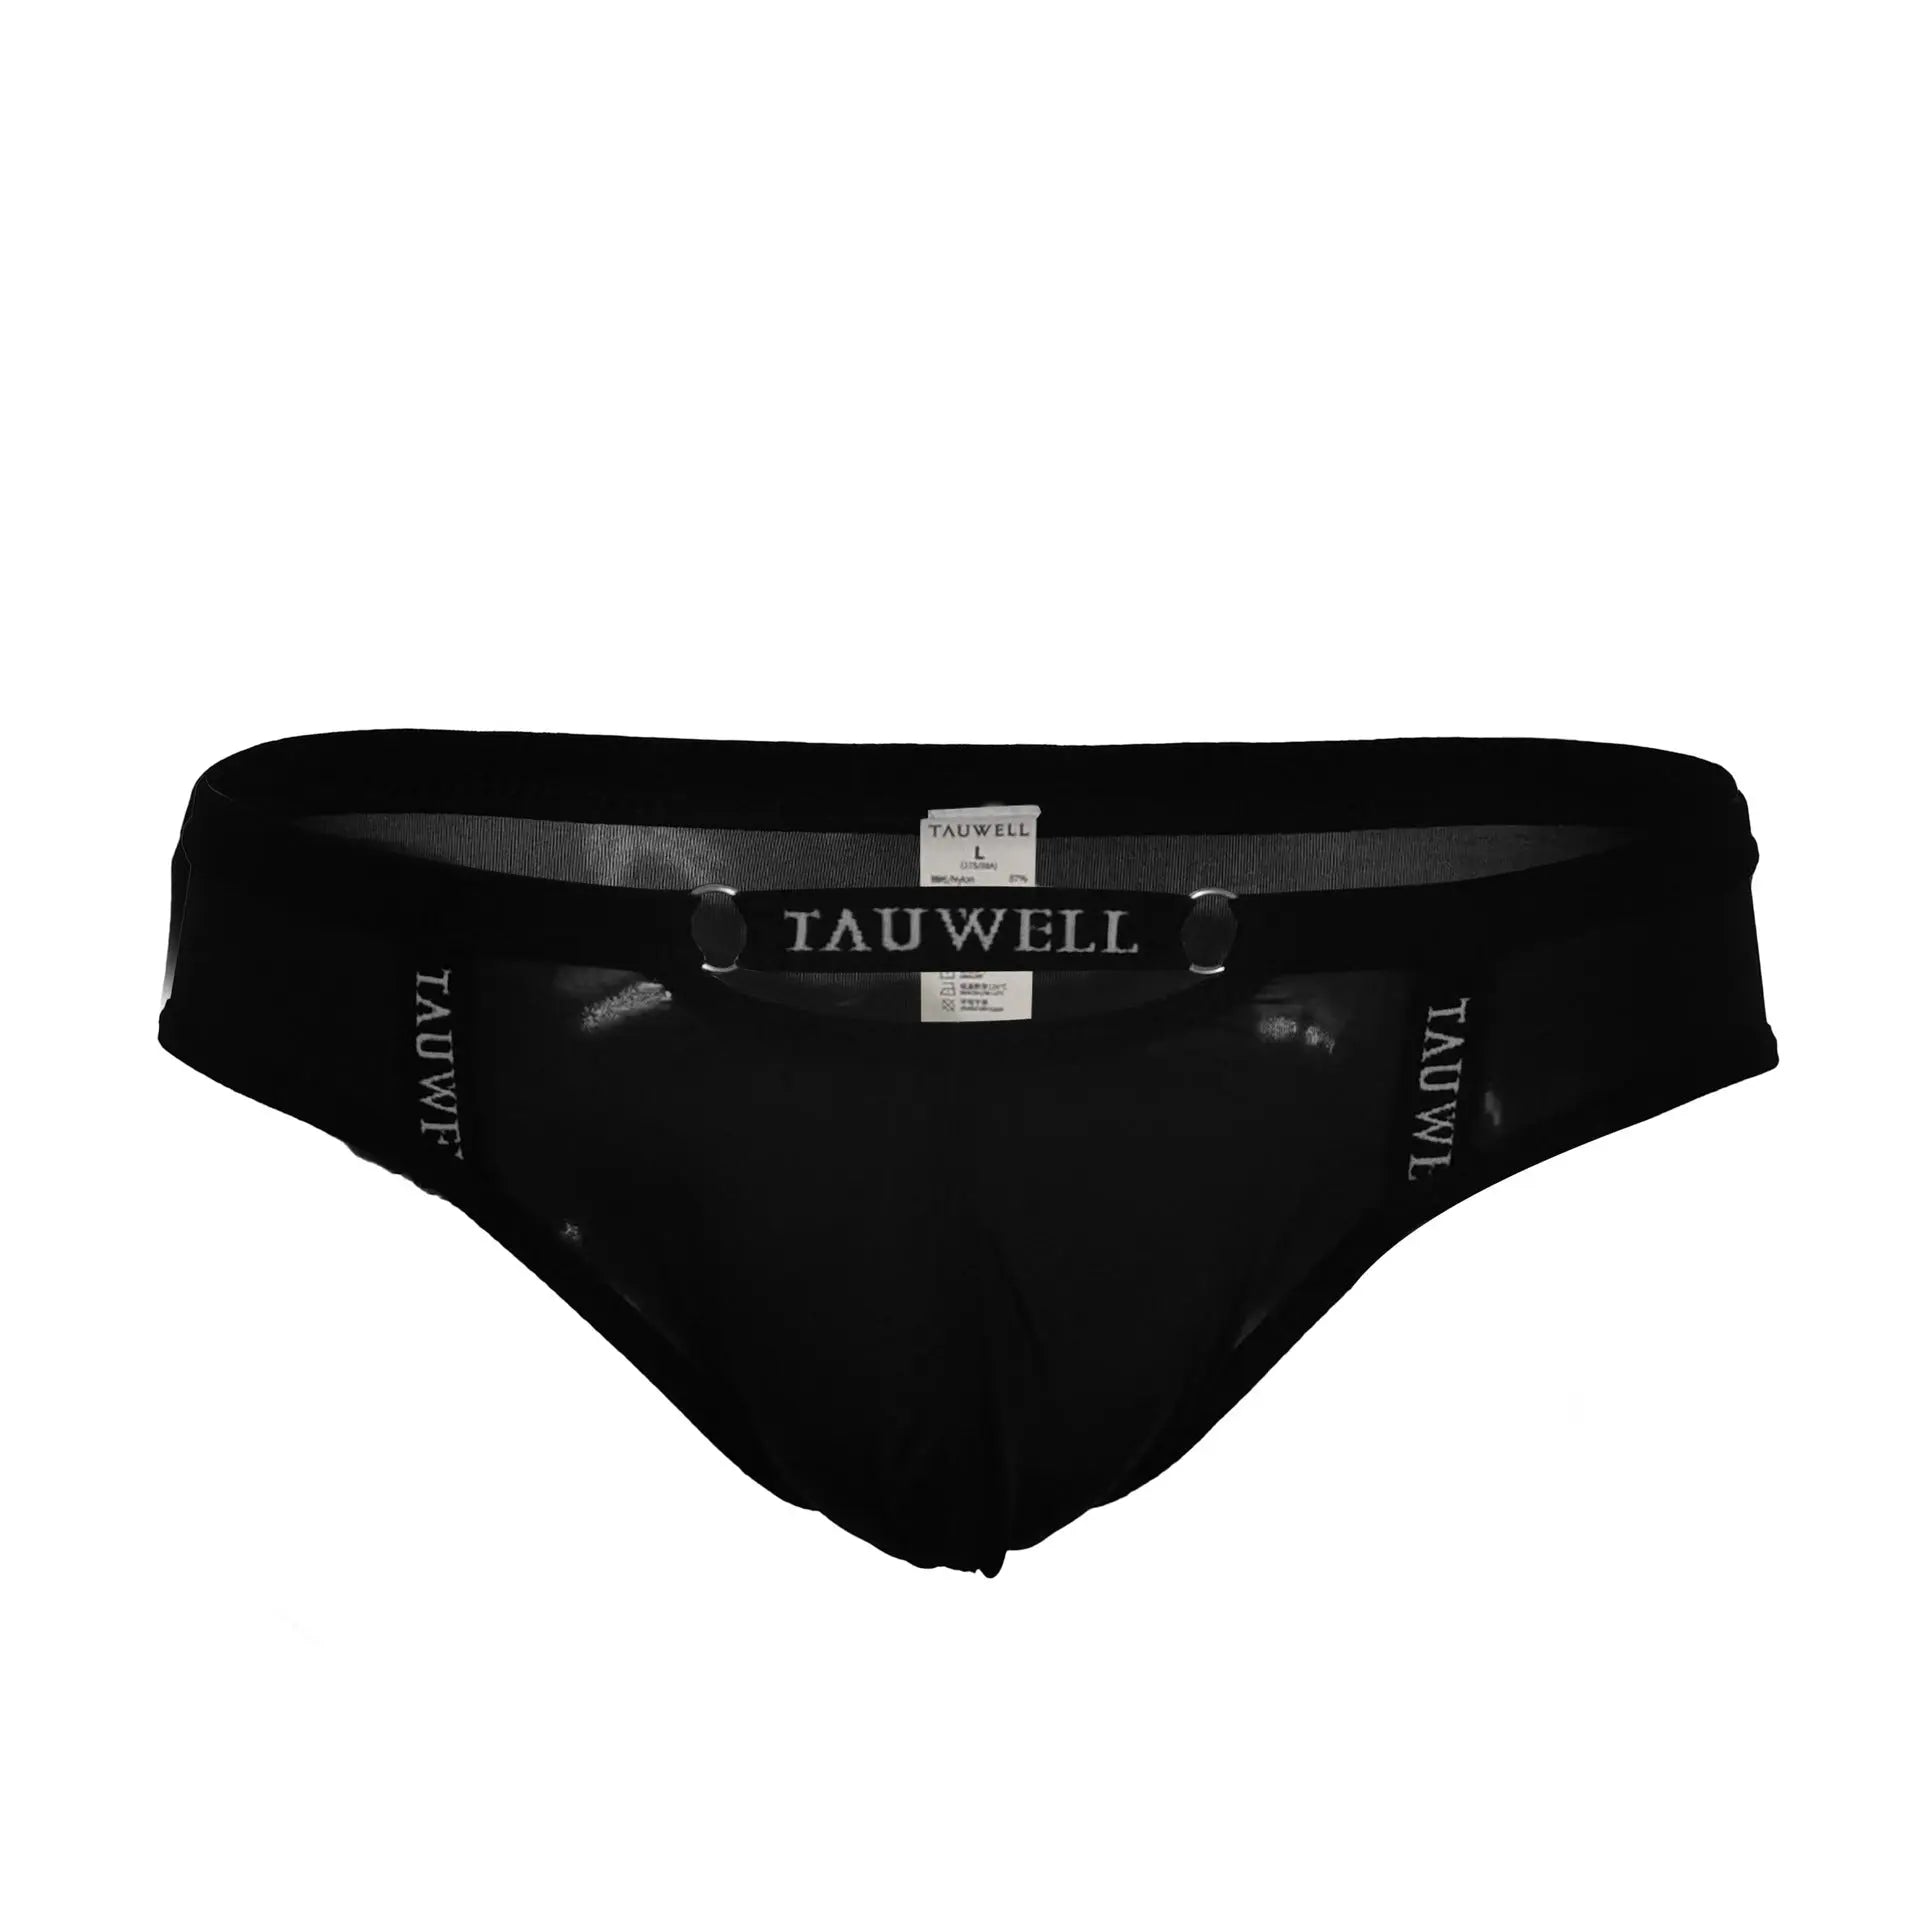 TAUWELL Men's Briefs Sexy Personality TAUWELL